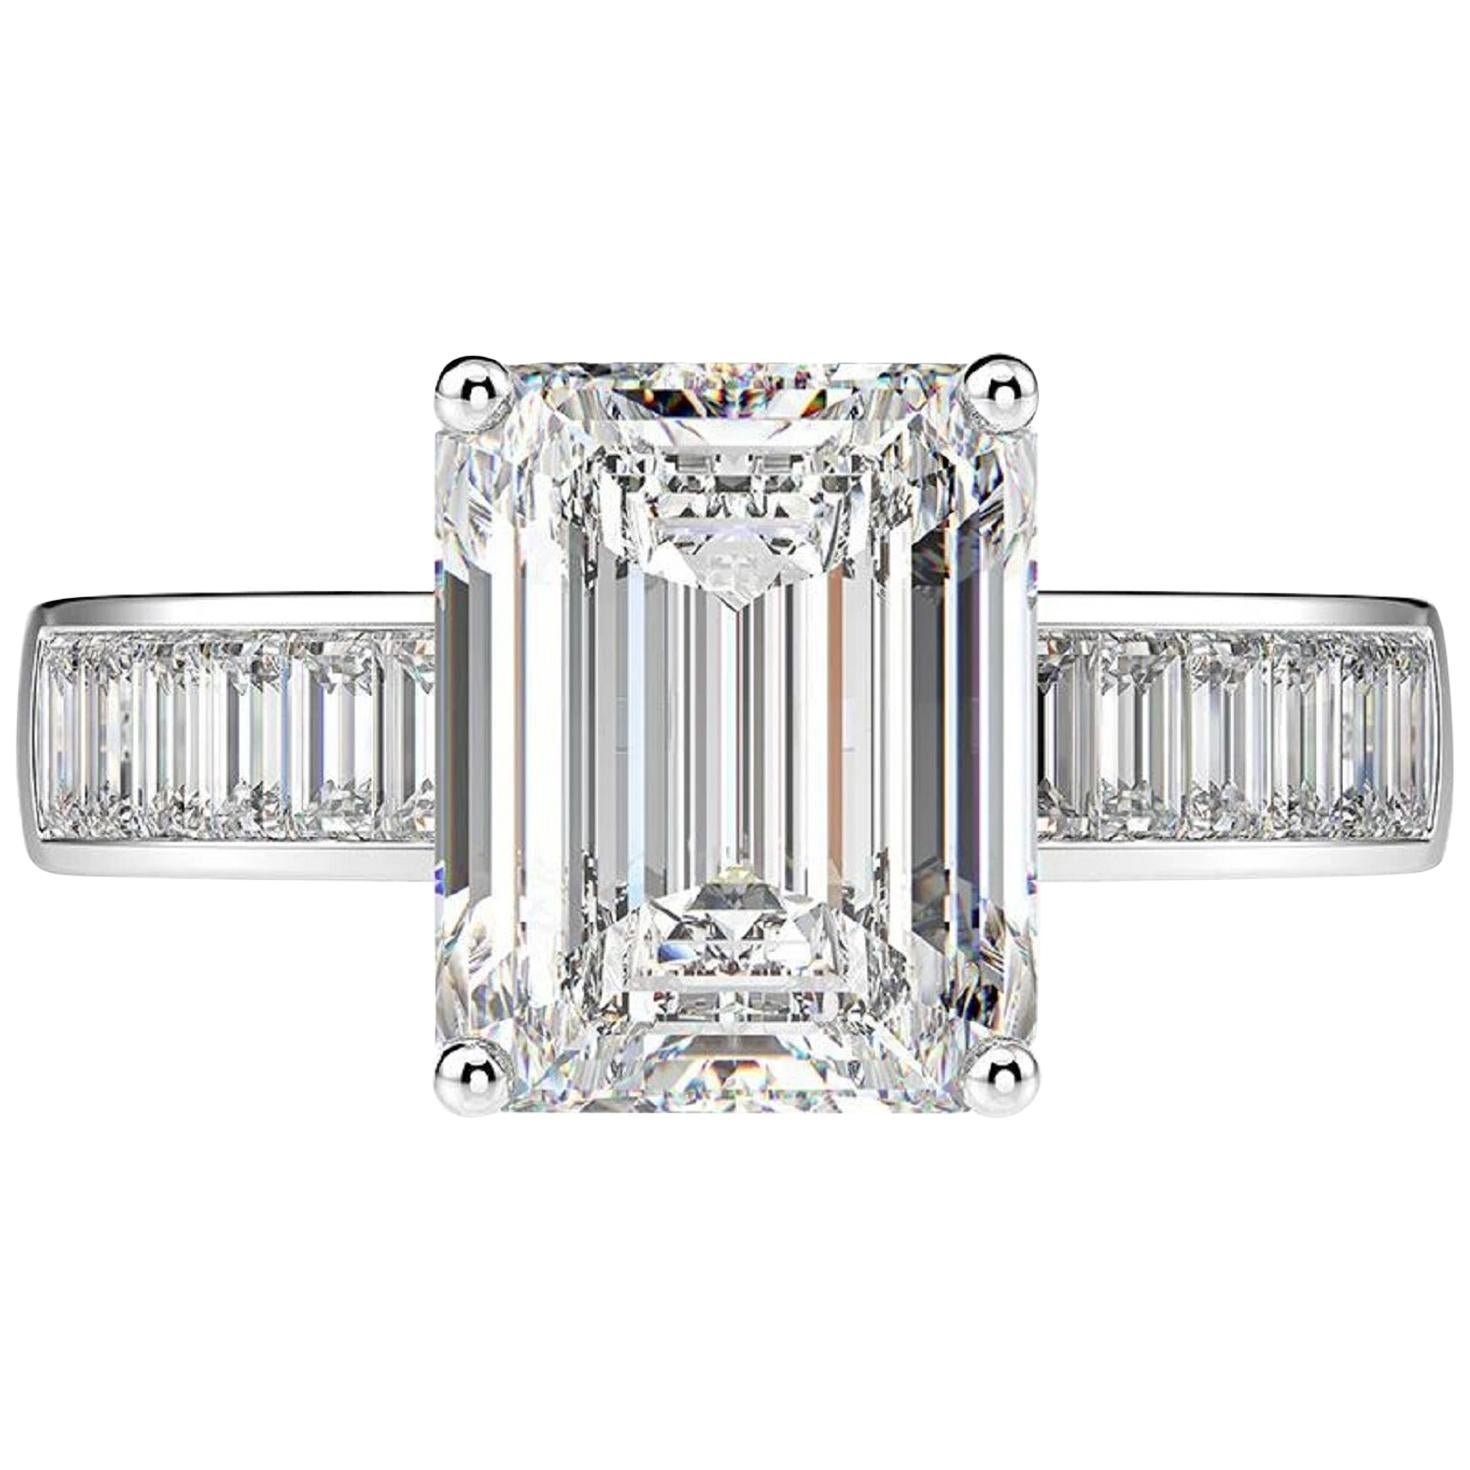 GIA Certified 2.05 Carat Diamond Engagement Ring with Side Emerald Cut Diamonds